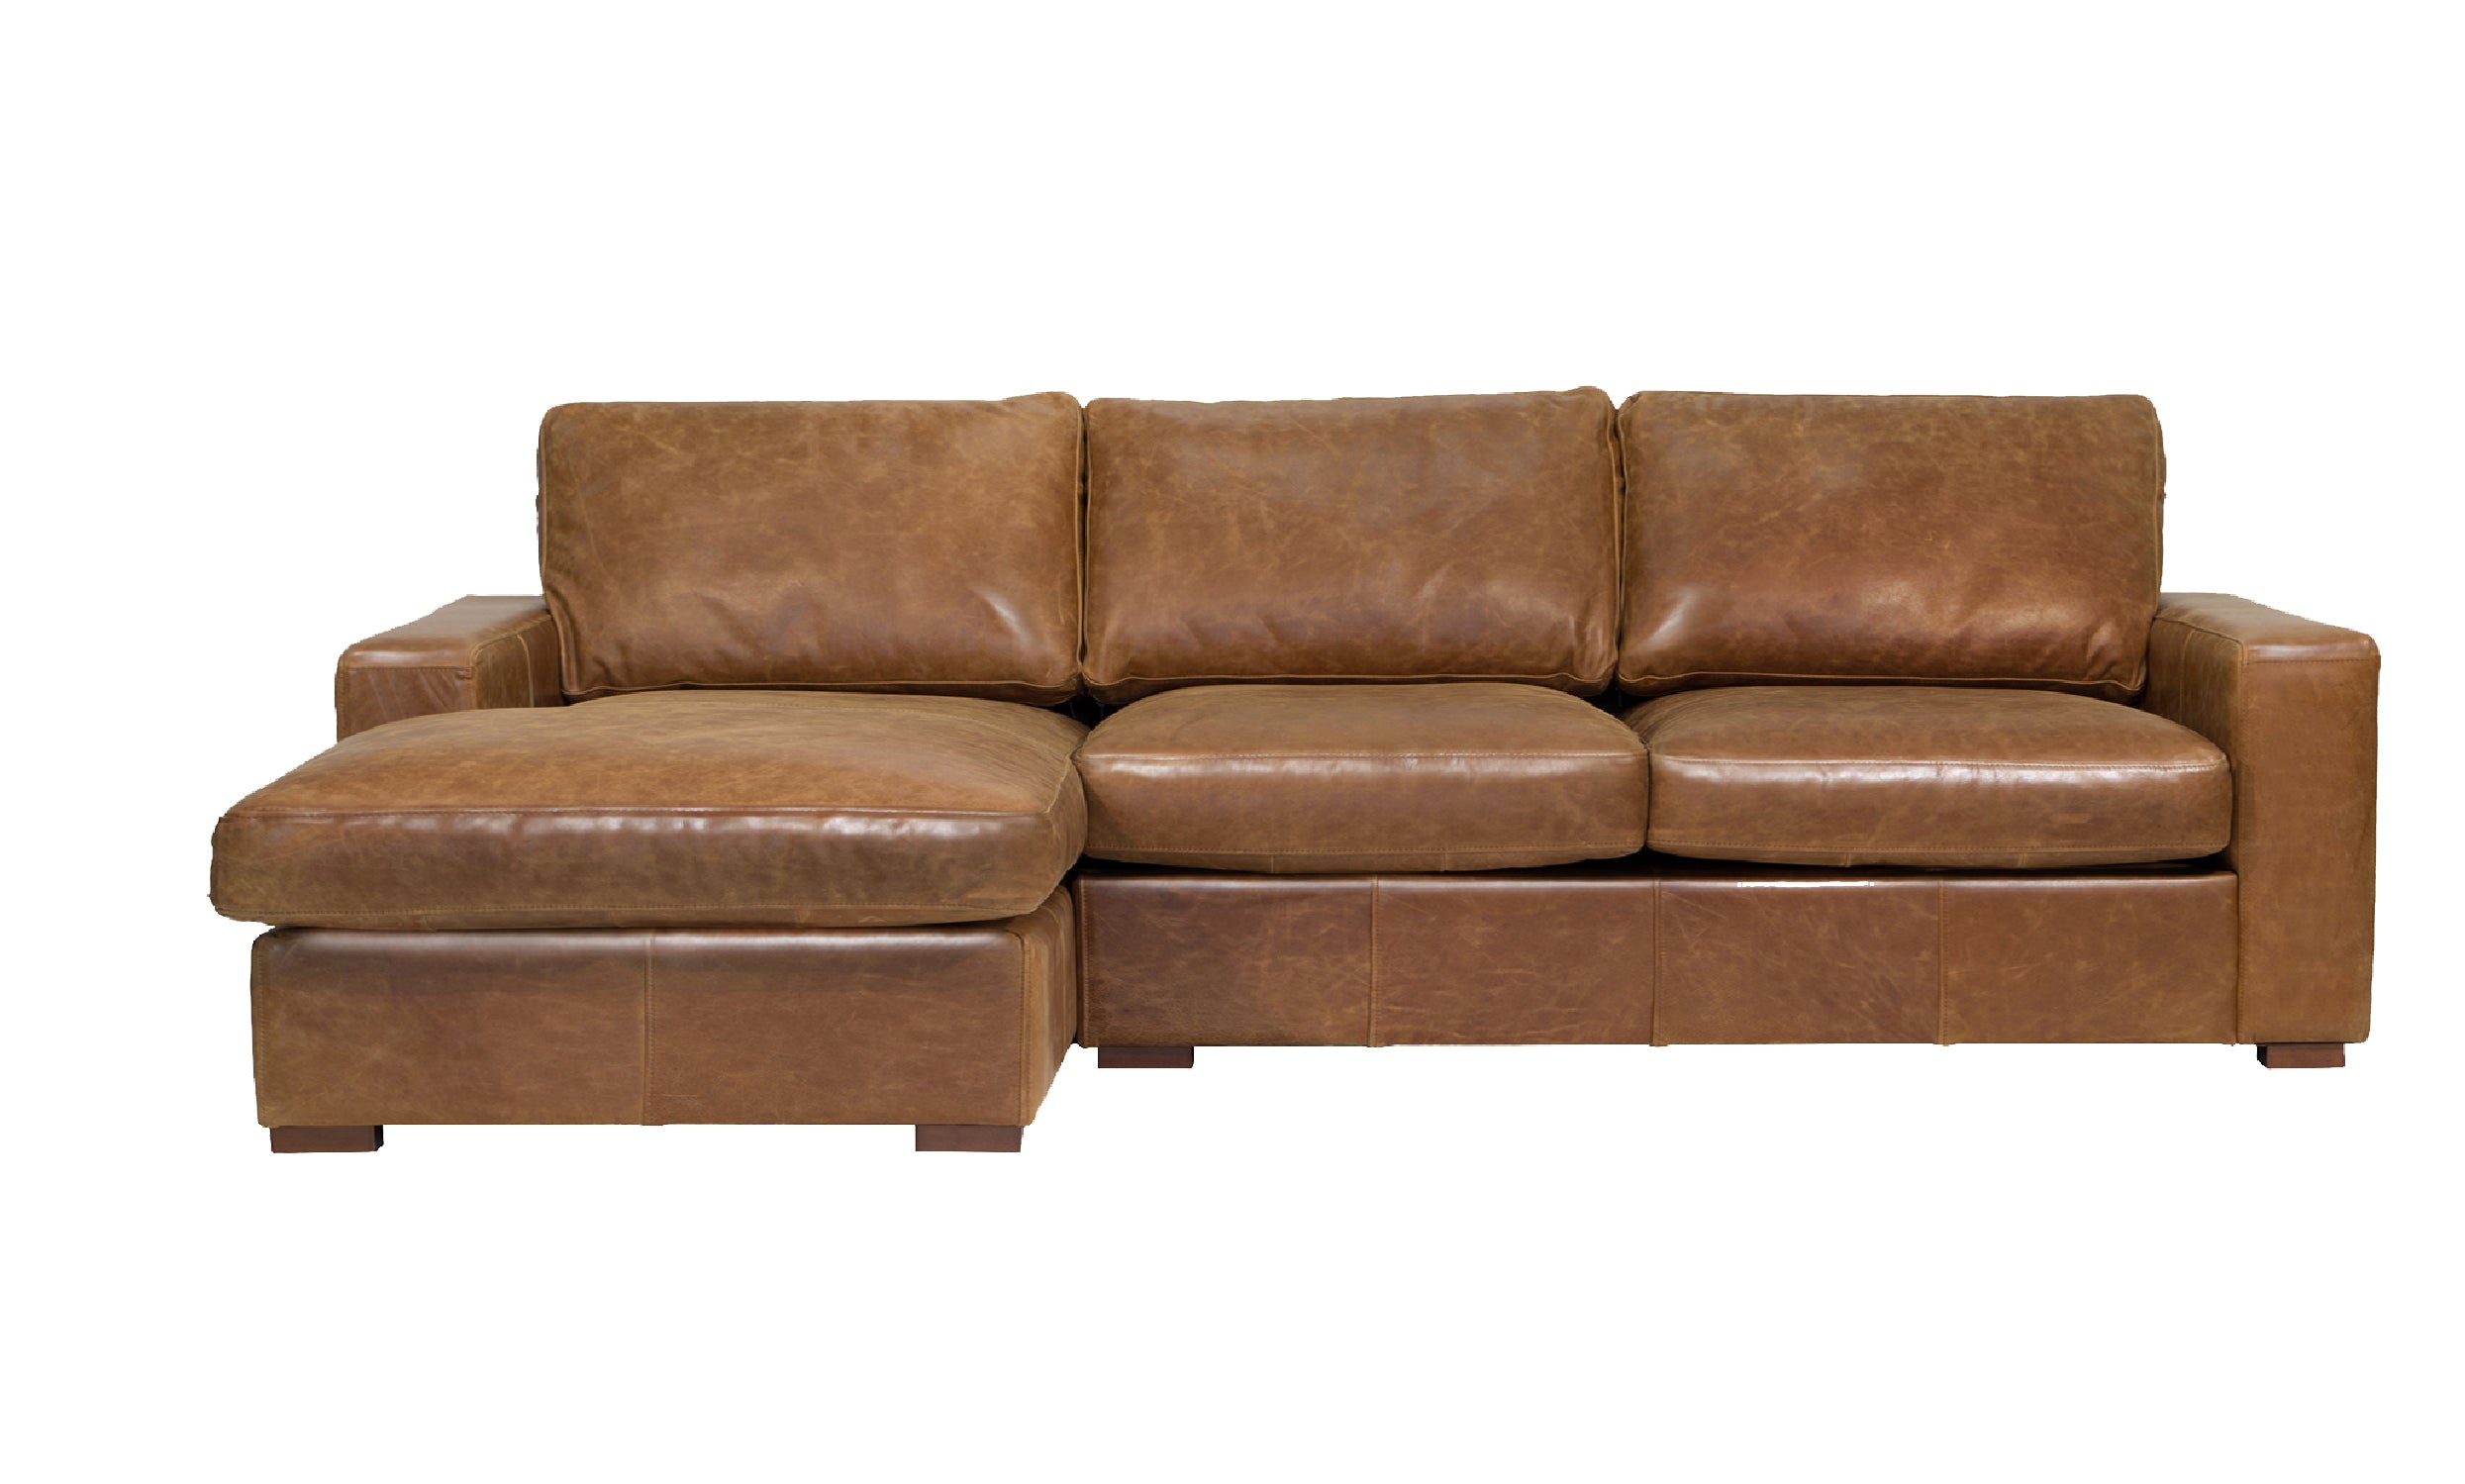 Maximus Full Aniline Chaise and Corner Groups-harris tweed leather sofas-Against The Grain Furniture-3 Seater Left Hand Facing Chaise-Against The Grain Furniture